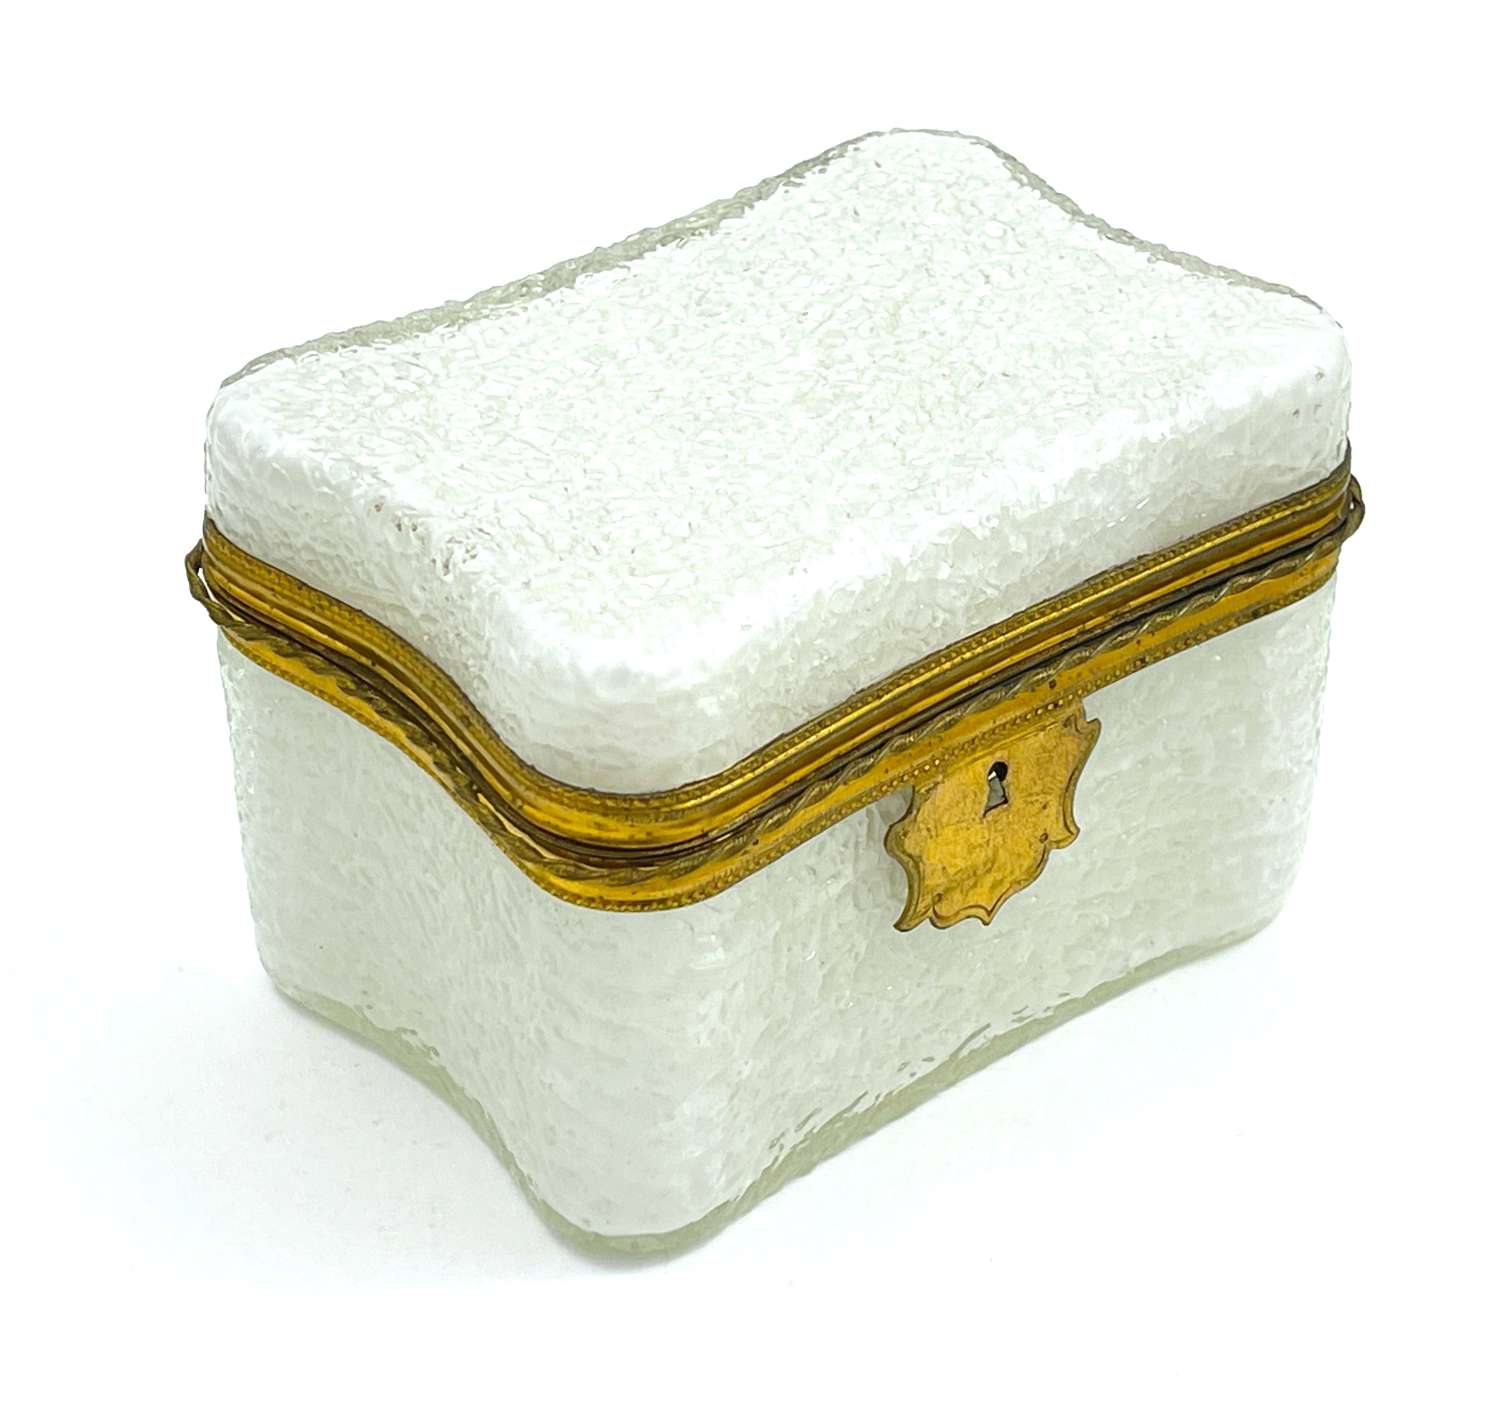 Antique French White Opaline 'Crackled' Glass Casket Box